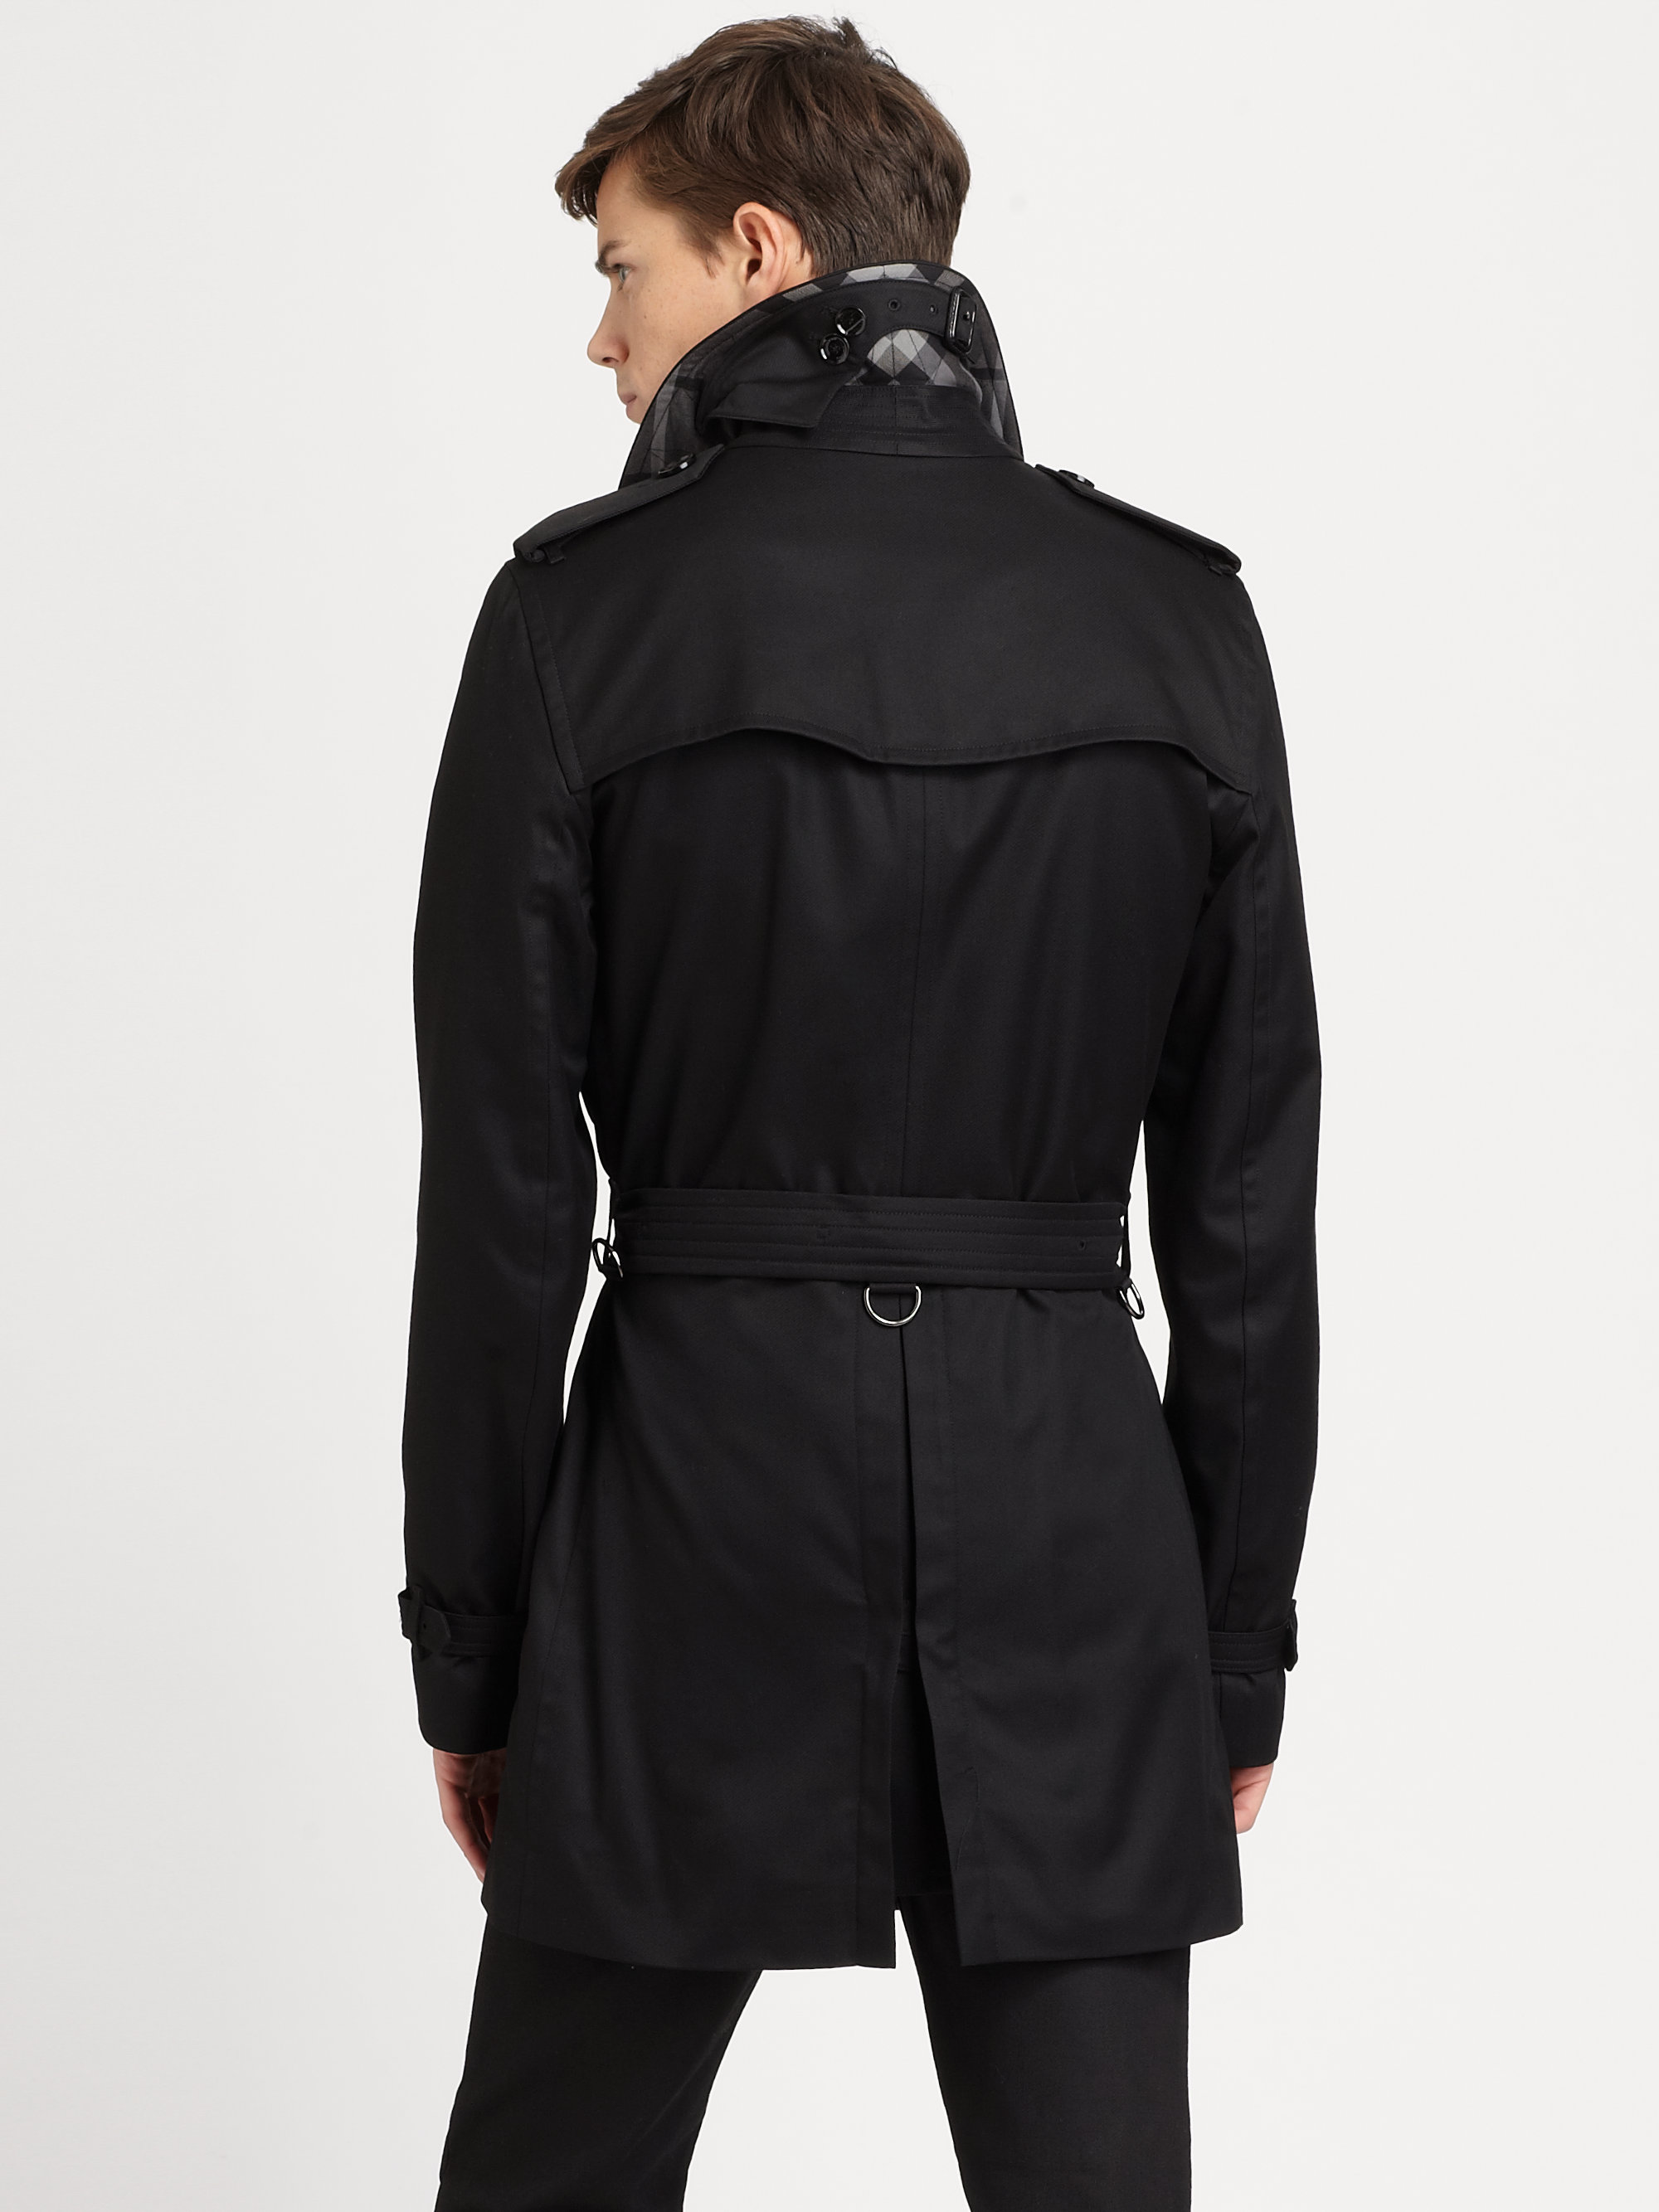 Burberry Britton Single Breasted Trench Coat in Black for Men - Lyst